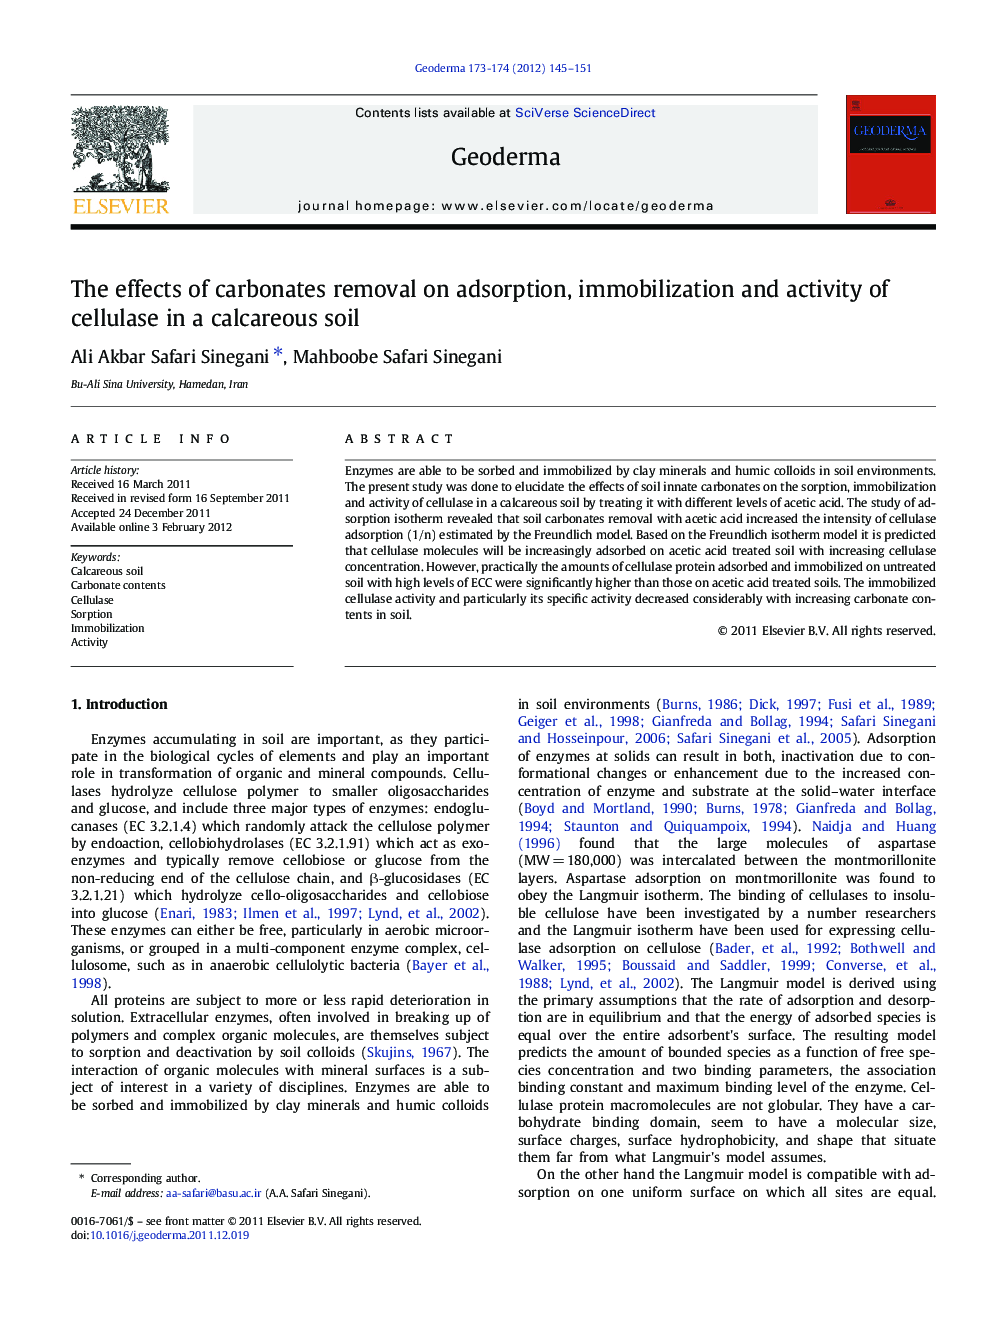 The effects of carbonates removal on adsorption, immobilization and activity of cellulase in a calcareous soil